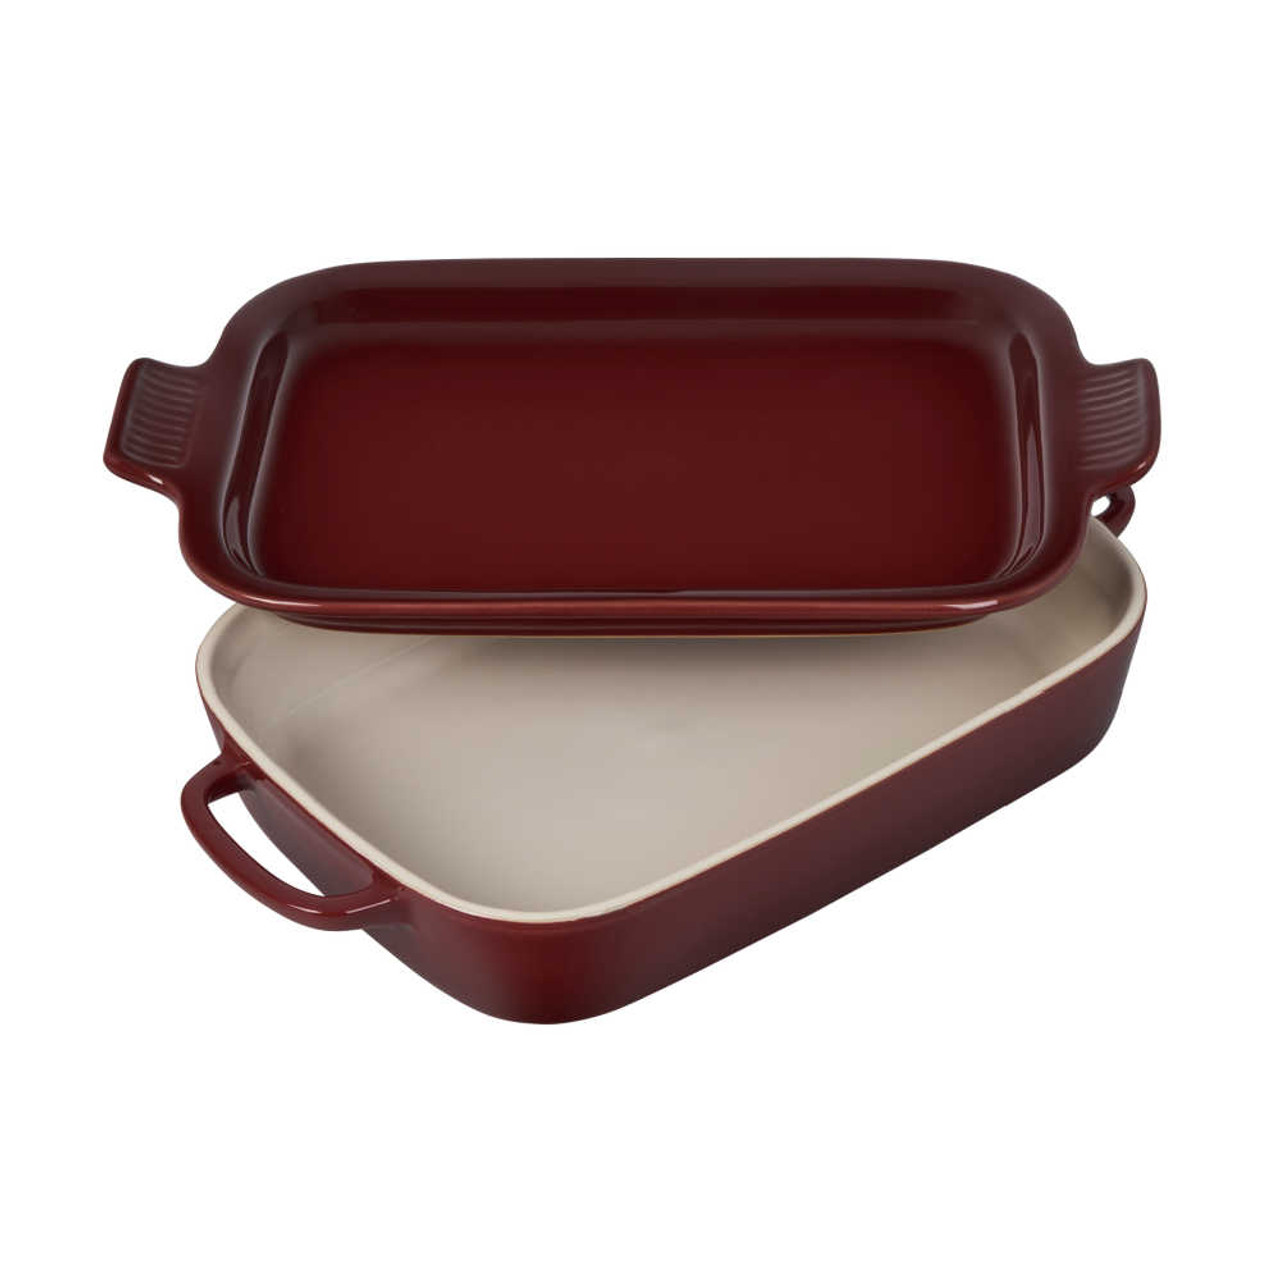 https://cdn11.bigcommerce.com/s-hccytny0od/images/stencil/1280x1280/products/5565/24318/Le_Creuset_Rectangular_Dish_With_Platter_Lid_in_Rhone_2__25832.1691011048.jpg?c=2?imbypass=on